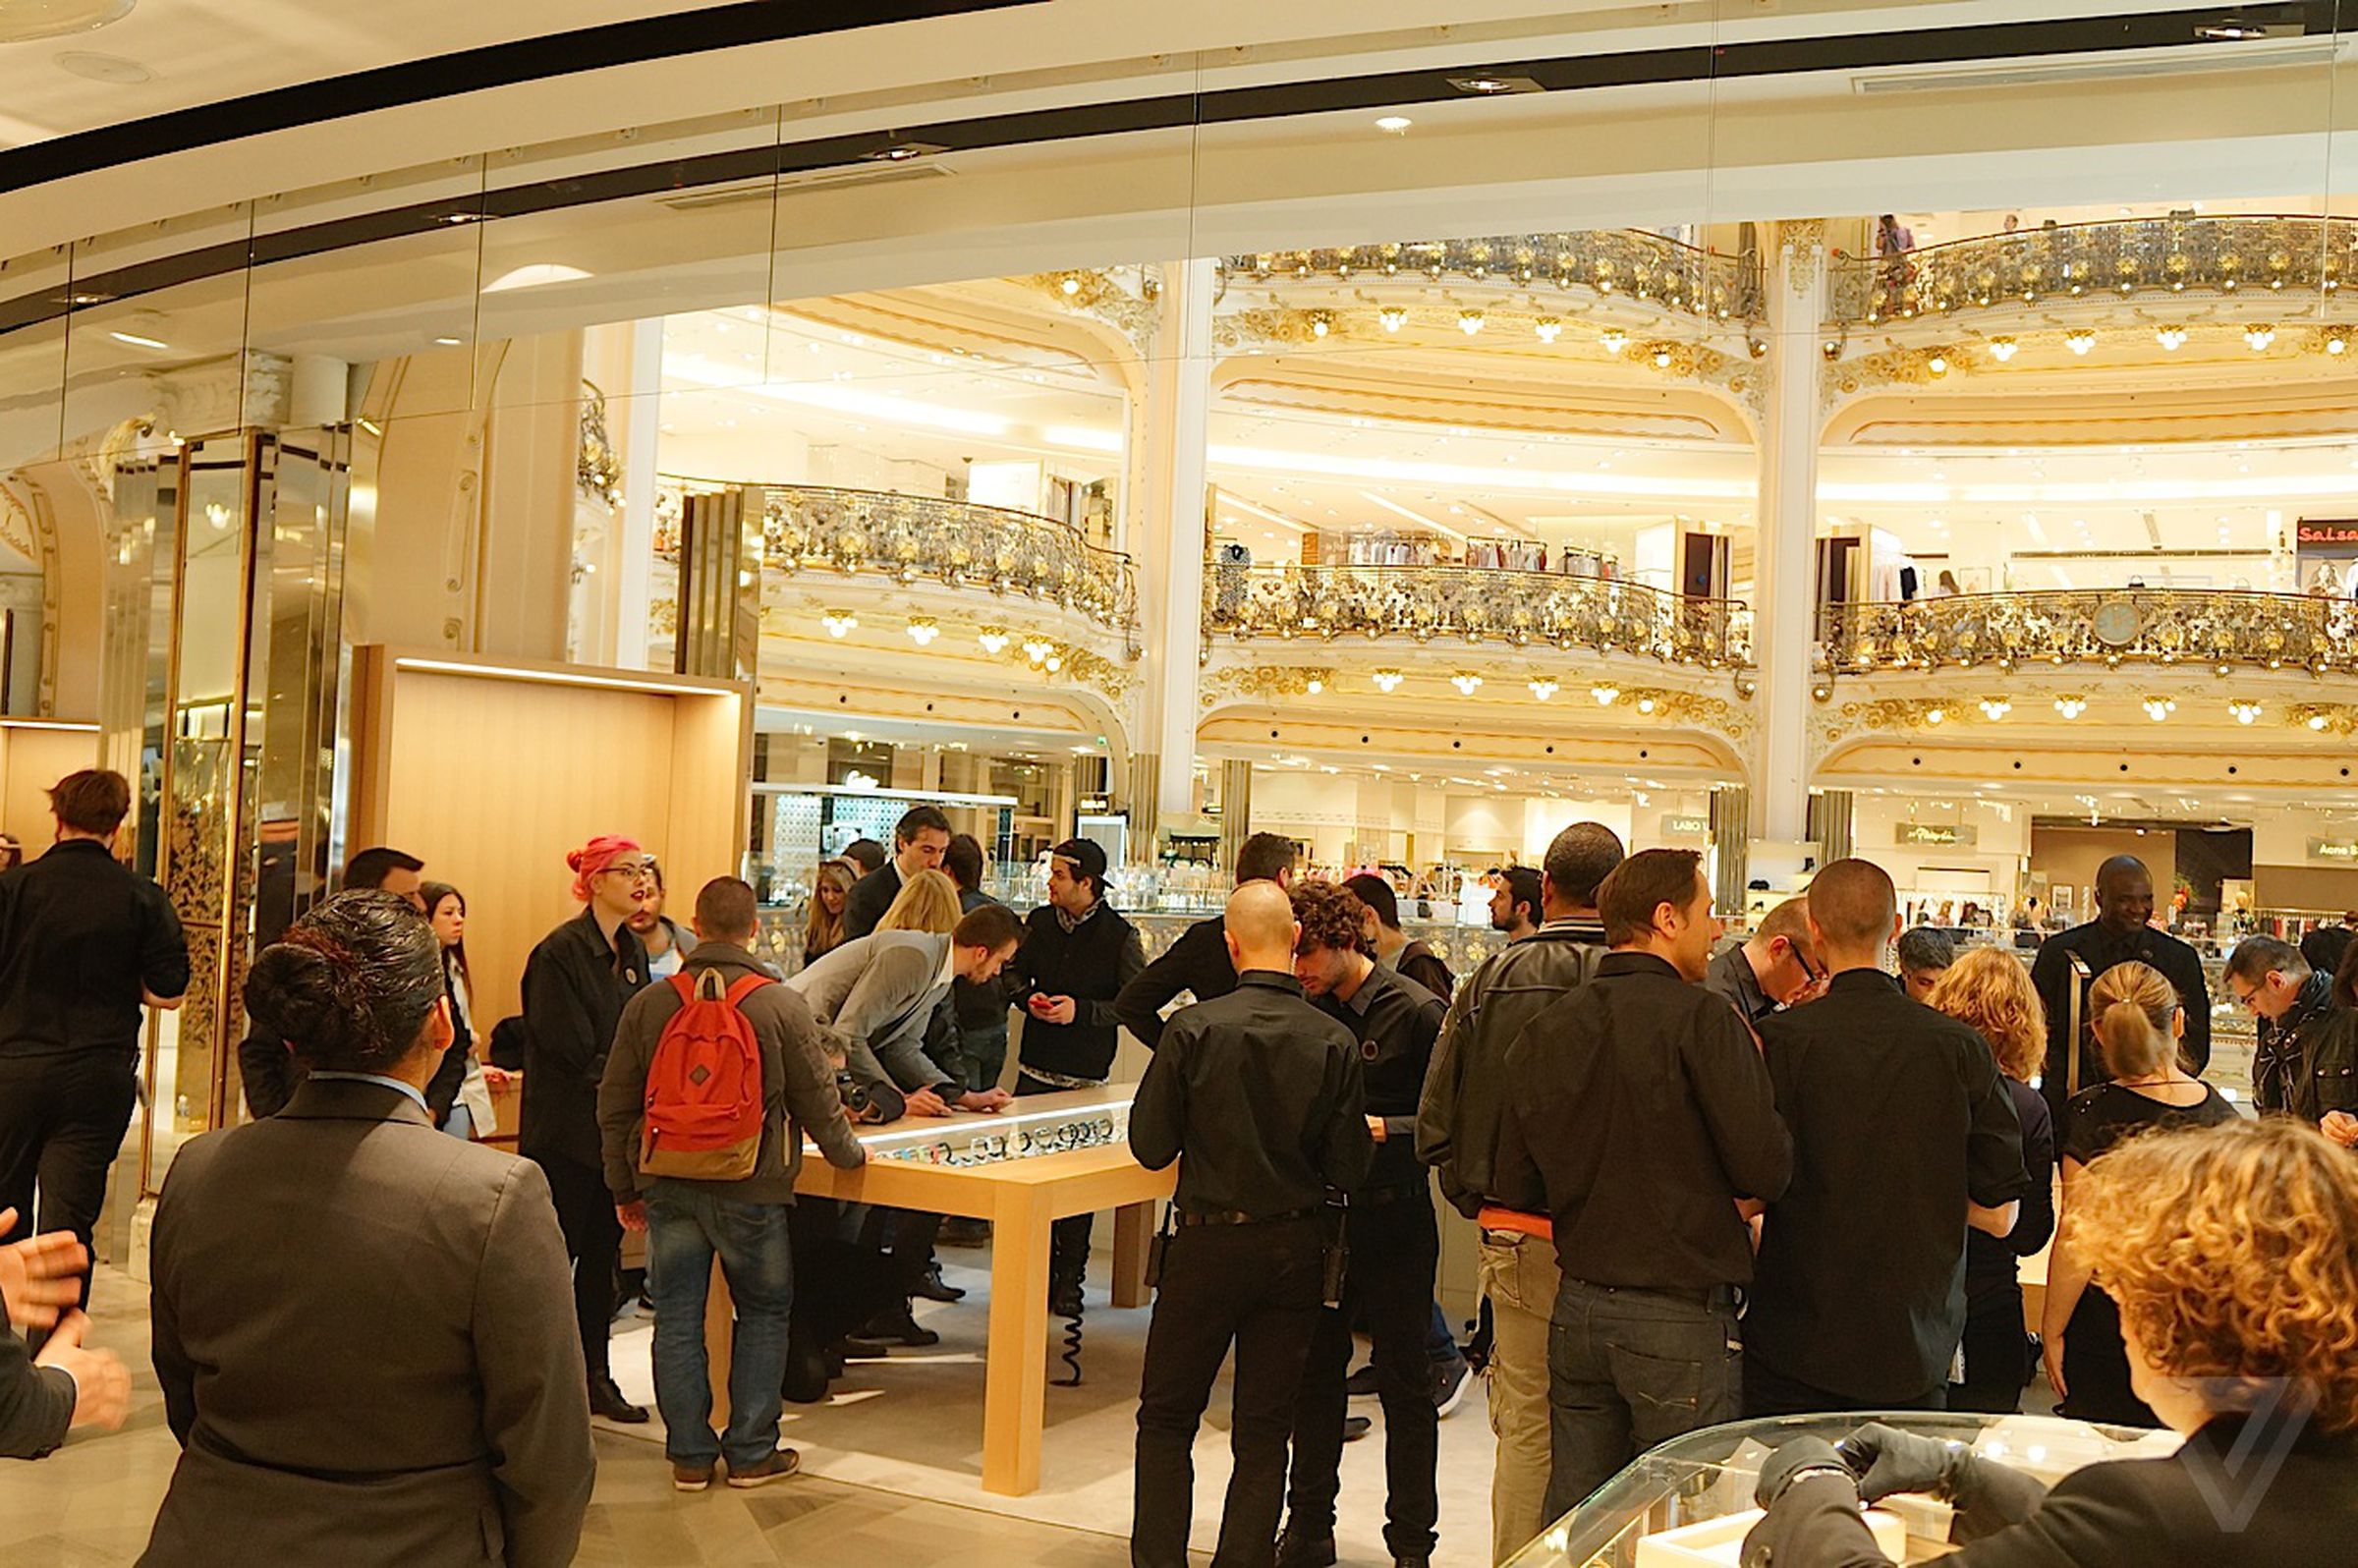 Department stores show the Apple Watch